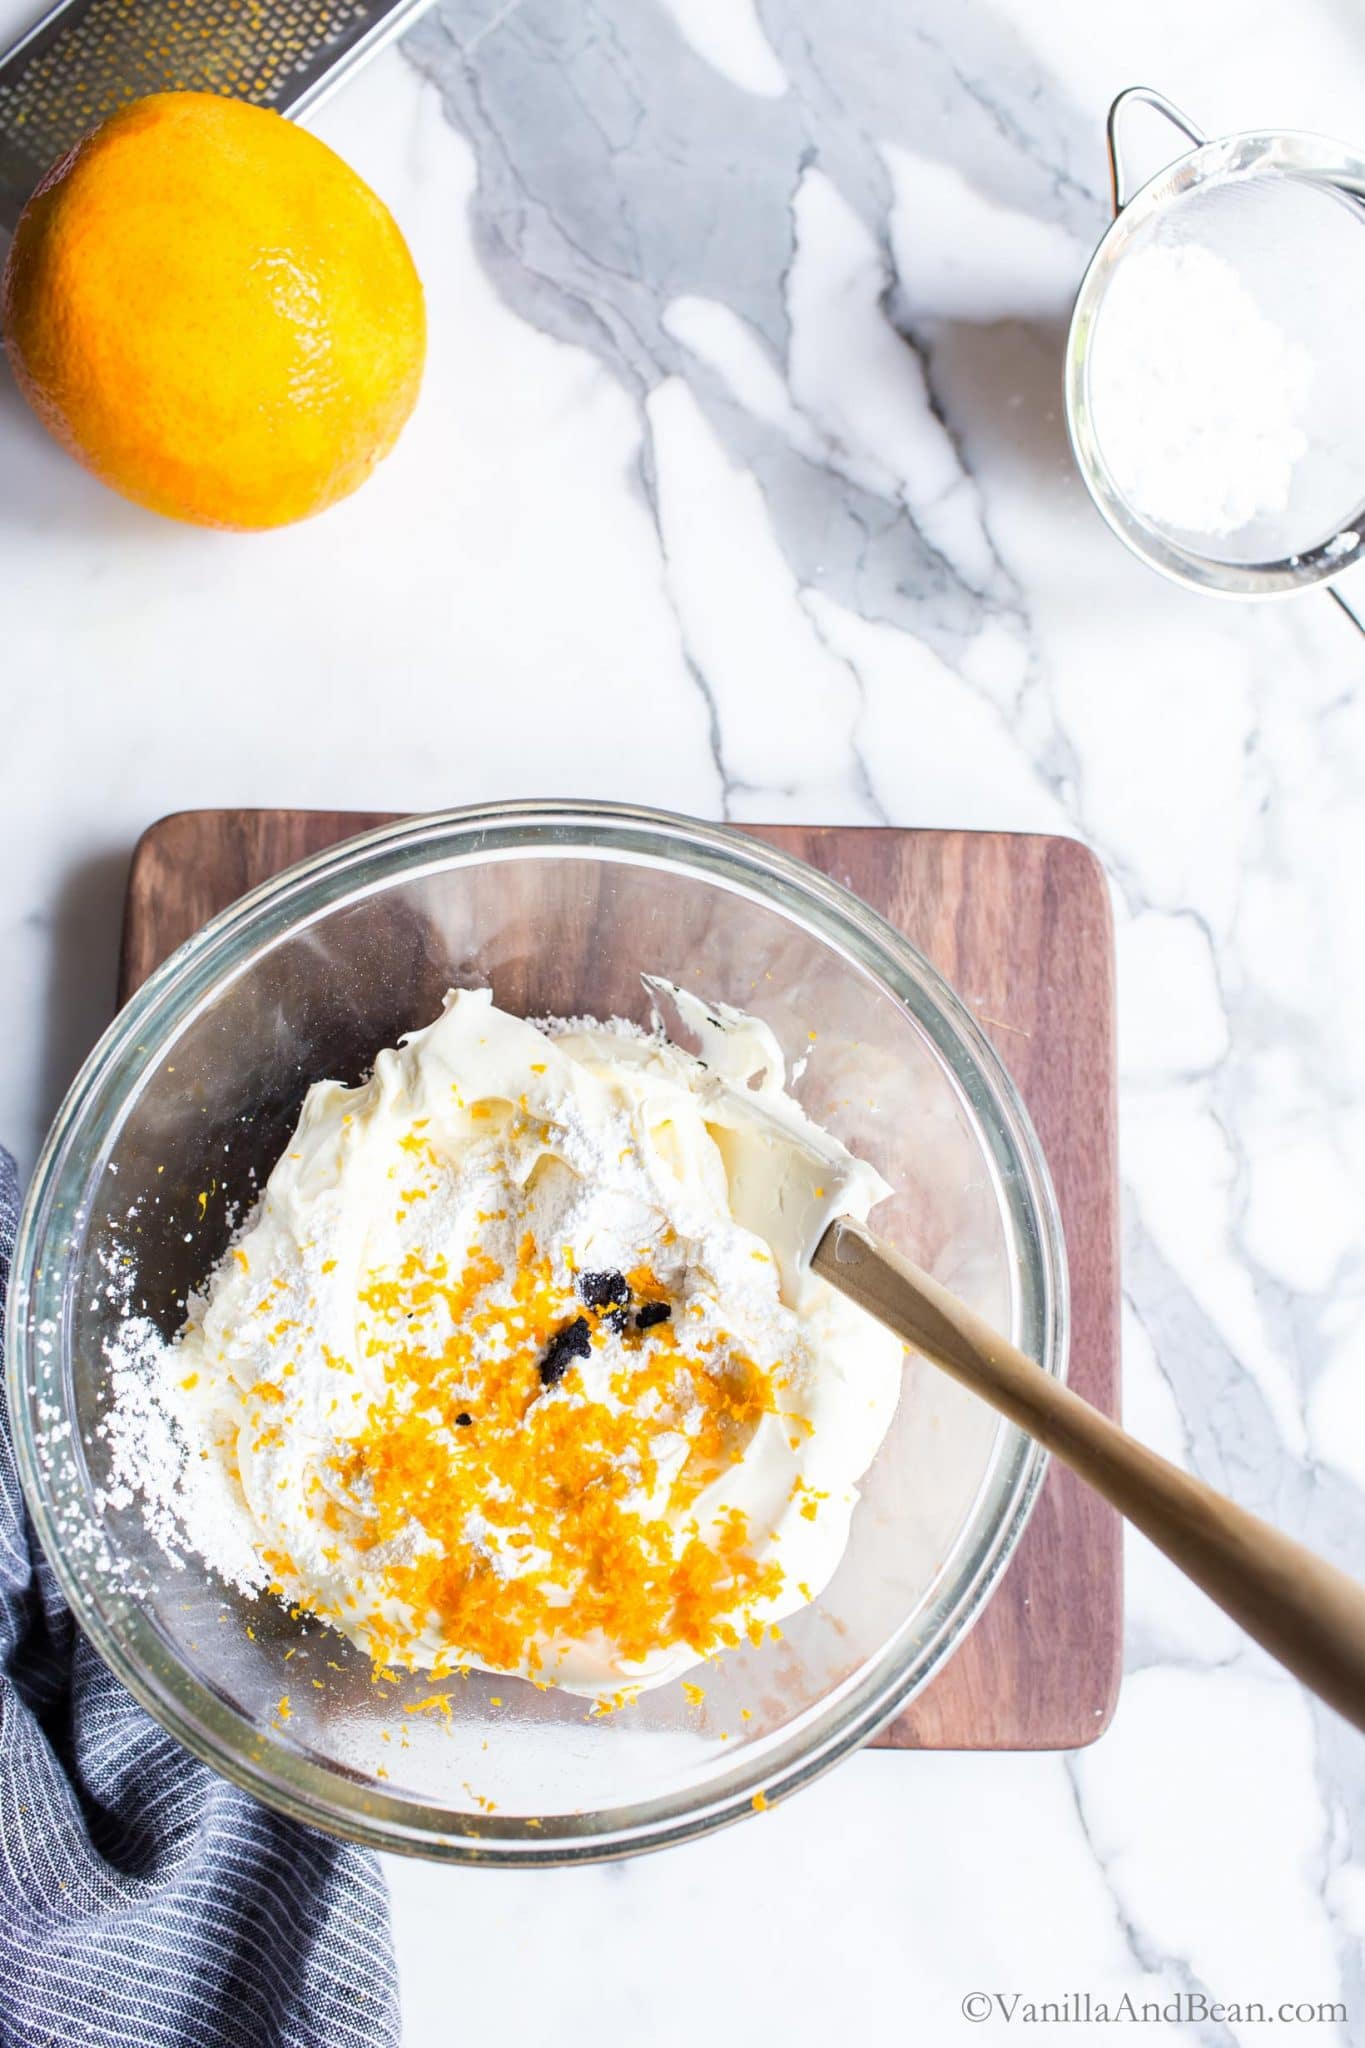 Mascarpone Frosting in a bowl with vanilla bean and orange zest.